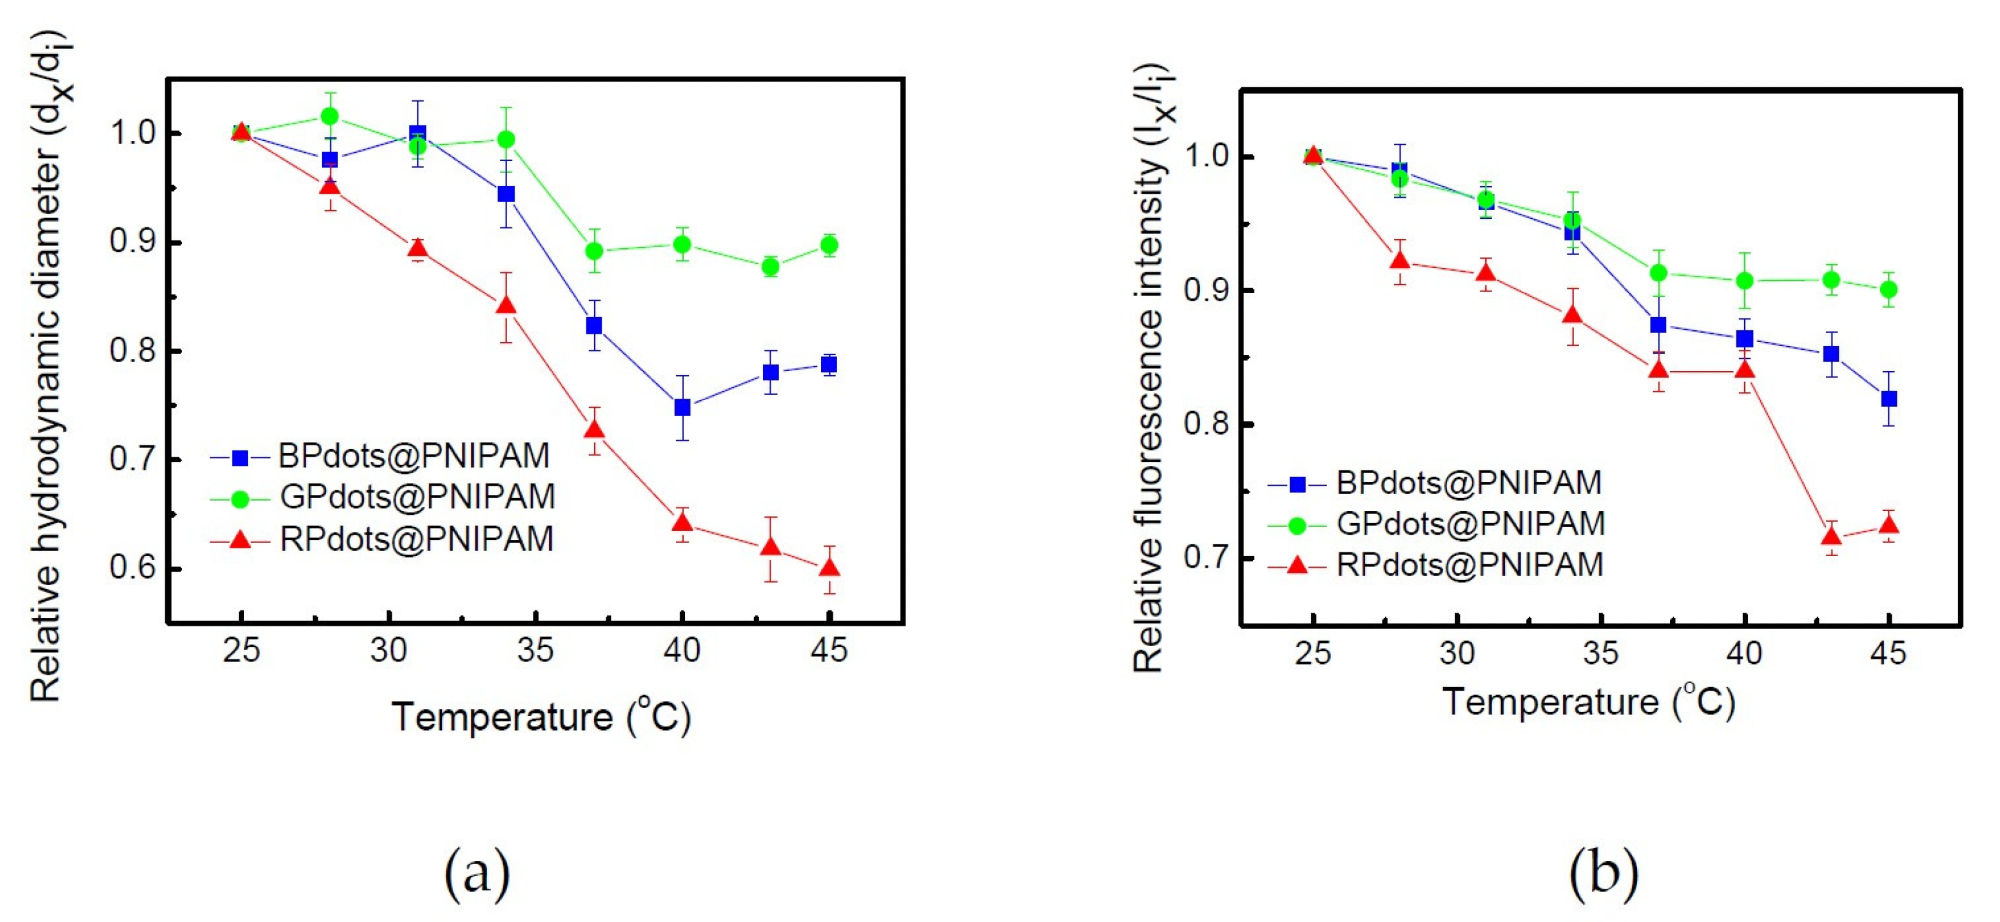 Changes in the (a) hydrodynamic diameters and (b) fluorescence intensities of Pdots@PNIPAM in aqueous solution upon increase in temperature. di and dx correspond to hydrodynamic diameters at 25 °C and at elevated temperature, respectively. Ii and Ix correspond to fluorescent intensities at 25 °C and at elevated temperatures, respectively. Excitation wavelength 350 nm.